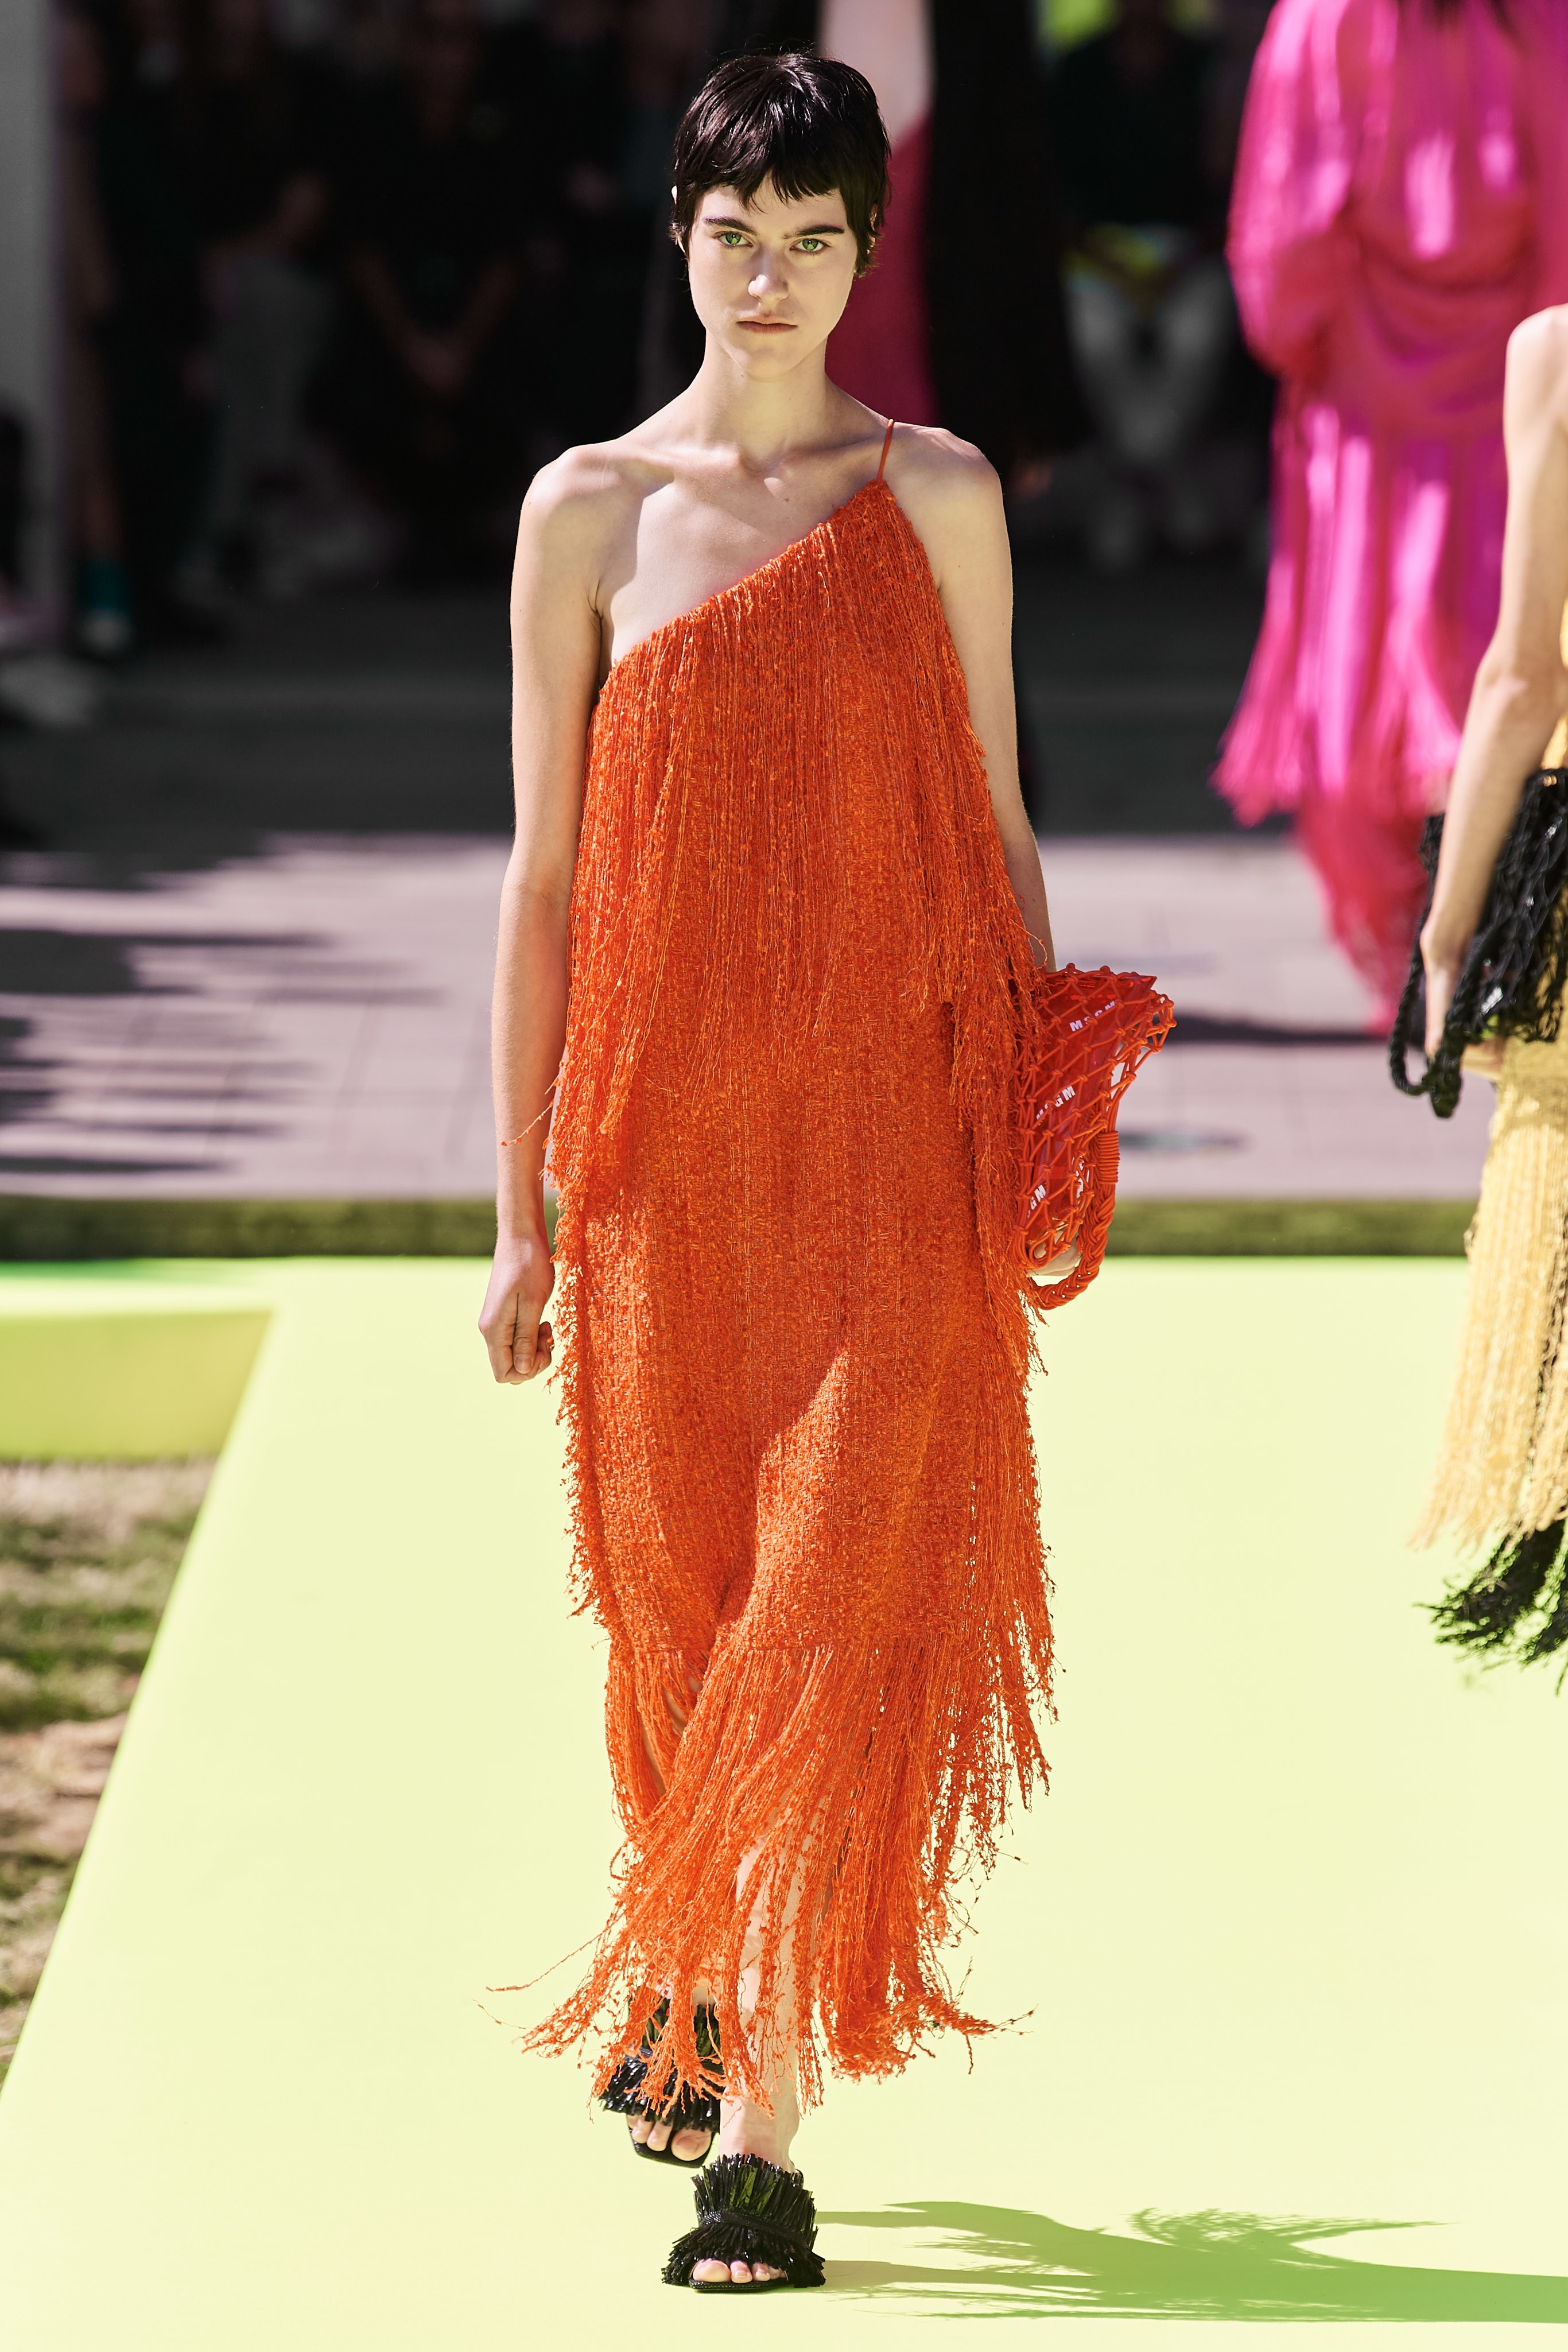 MSGM Spring Summer 2020 SS2020 trends runway coverage Ready To Wear VogueGivenchy Spring Summer 2020 SS2020 trends runway coverage Ready To Wear Vogue monochrome